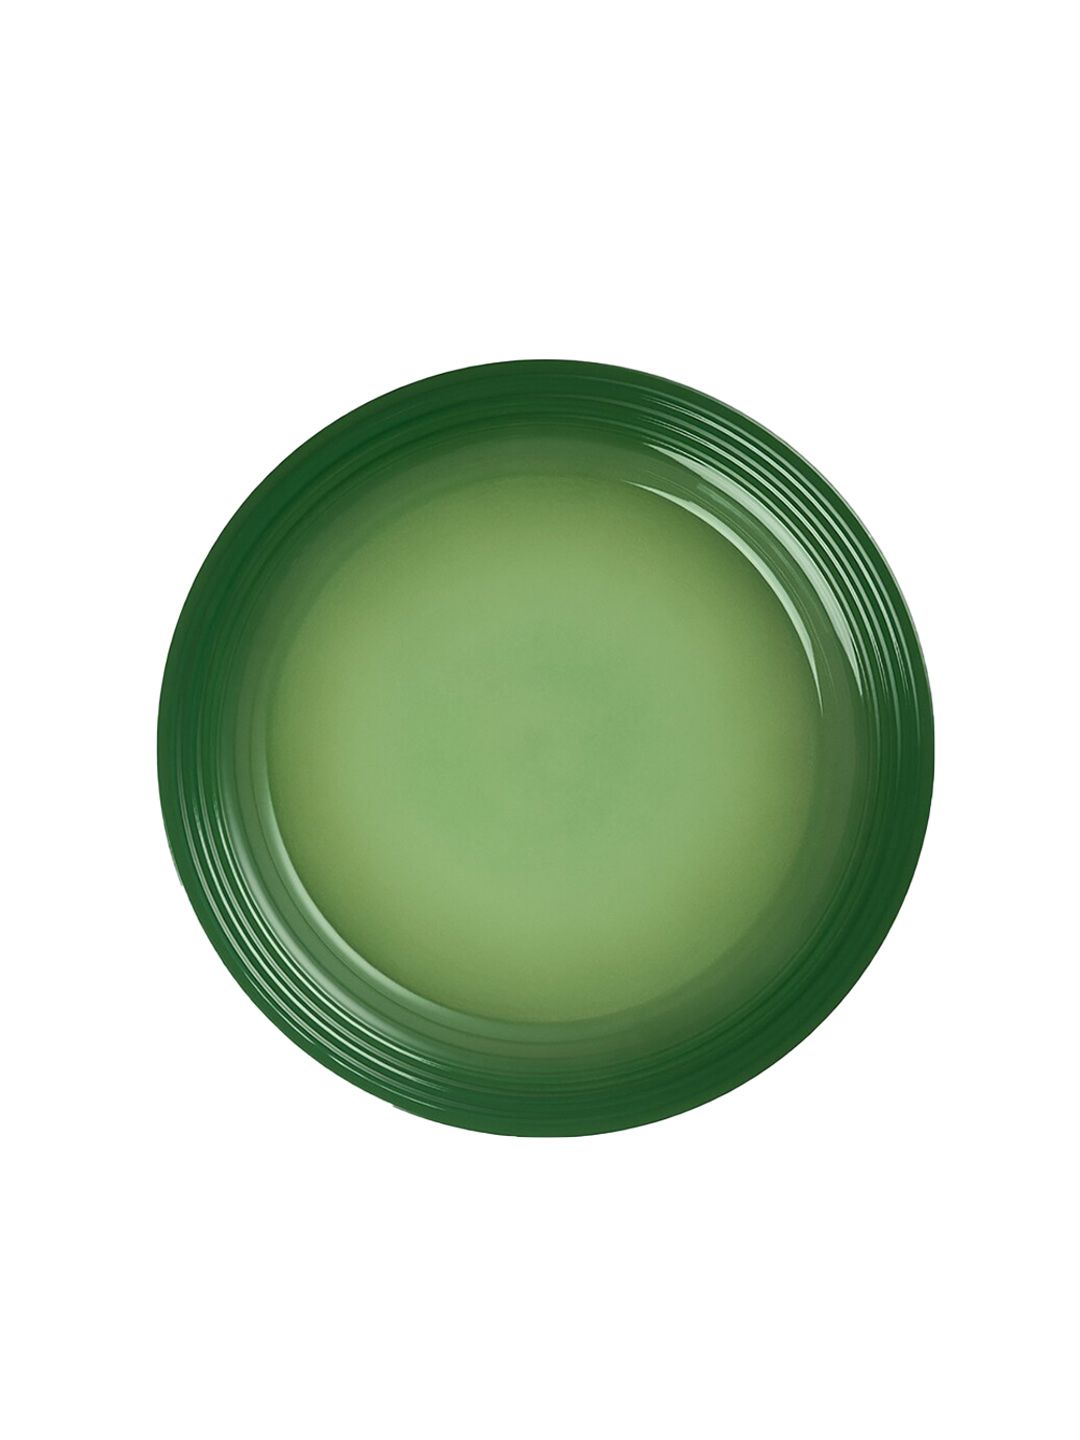 LE CREUSET Green Solid Stoneware Plate Price in India